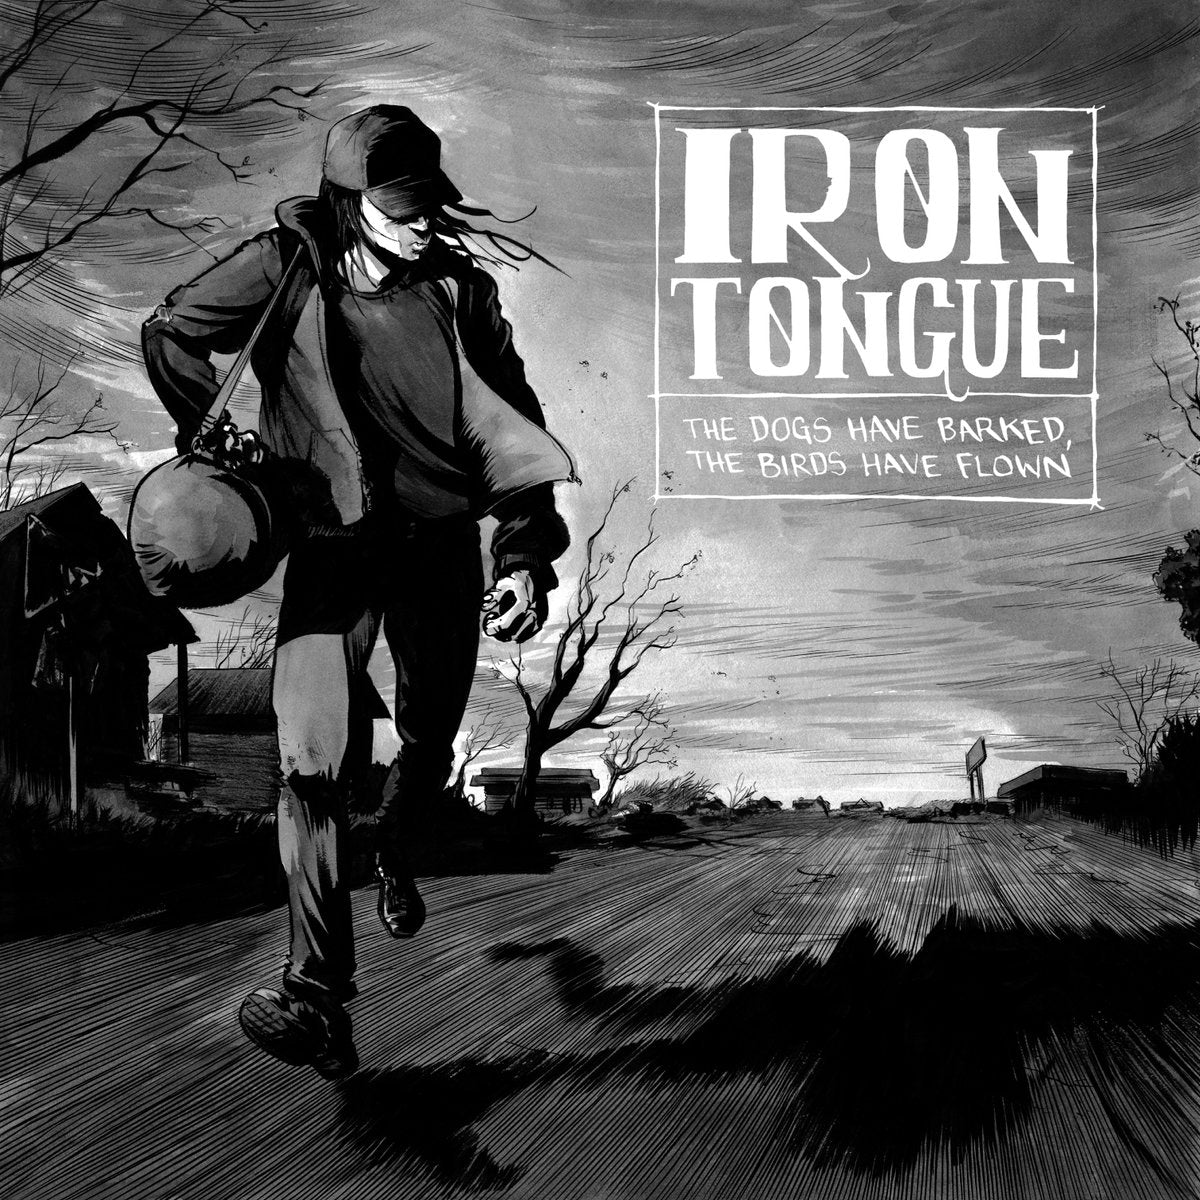 IRON TONGUE "The Dogs Have Barked The Birds Have Flown"